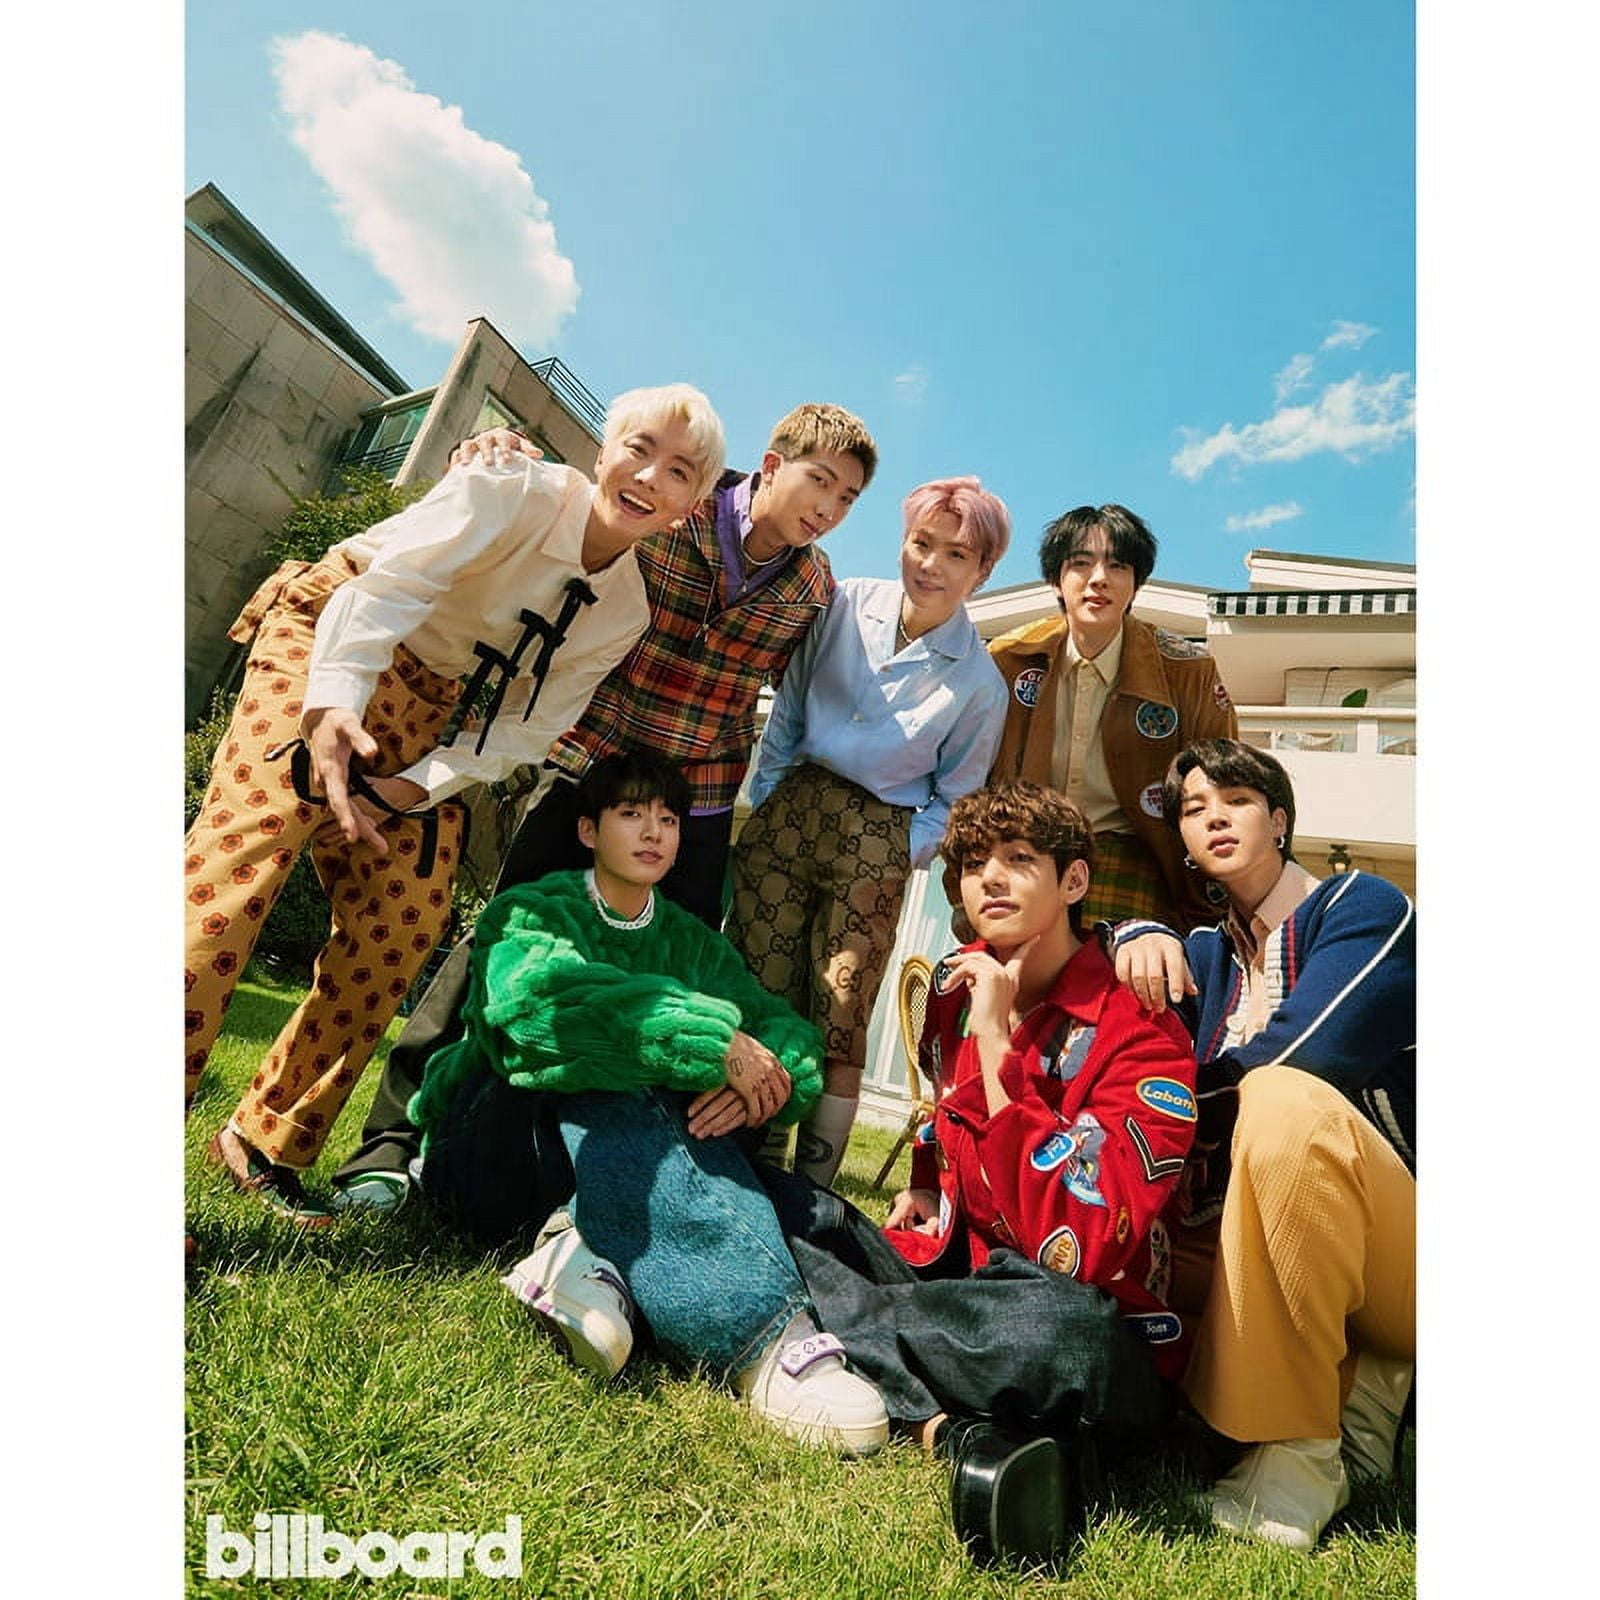 BTS MAP OF THE SOUL PERSONA OFFICIAL POSTERS (4 POSTERS SET)